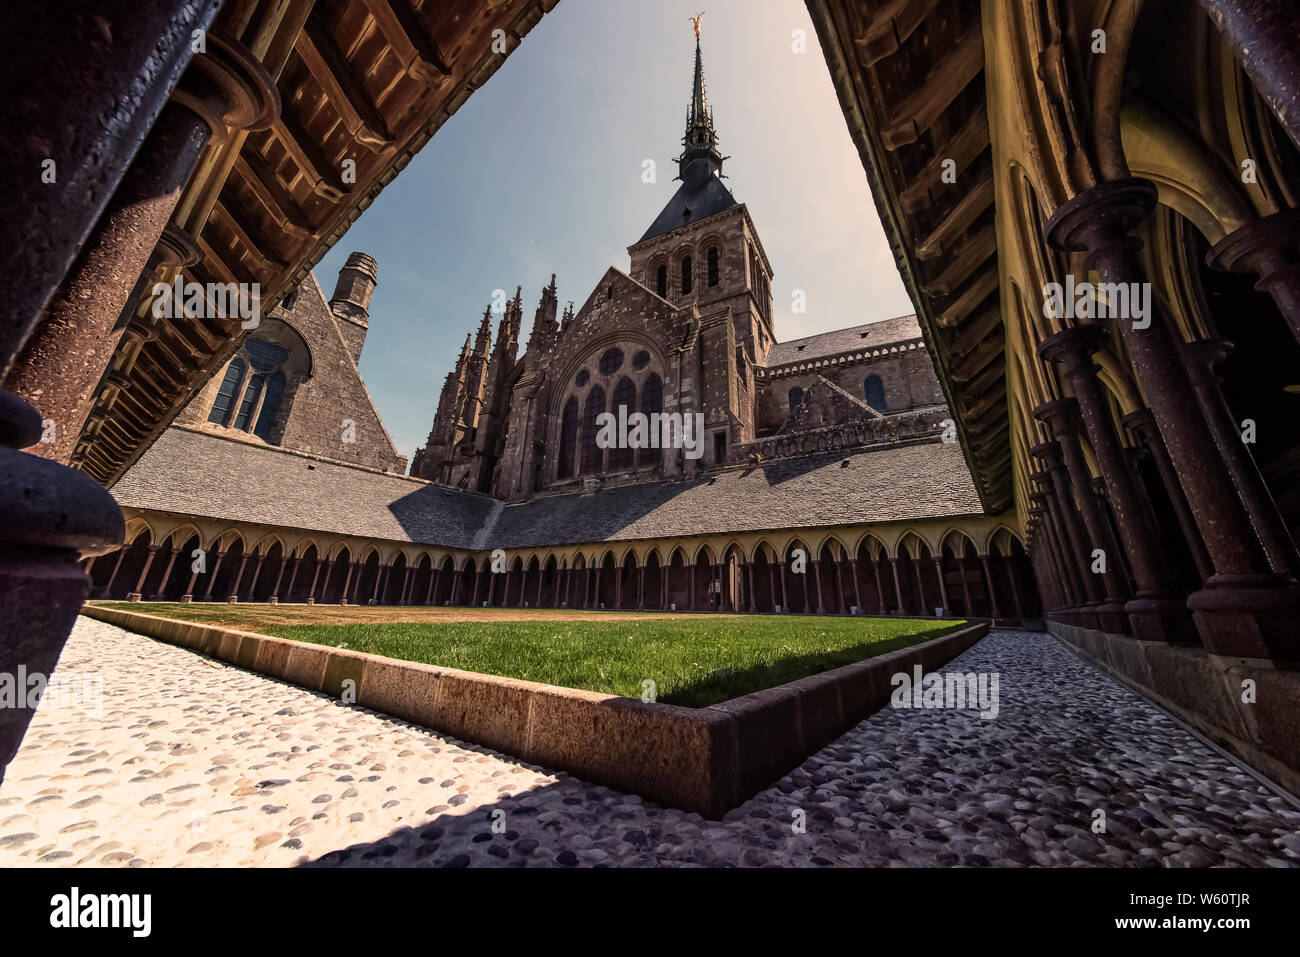 Abbey of the Mont Saint Michel village, an UNESCO world heritage site in Normandy, France Stock Photo